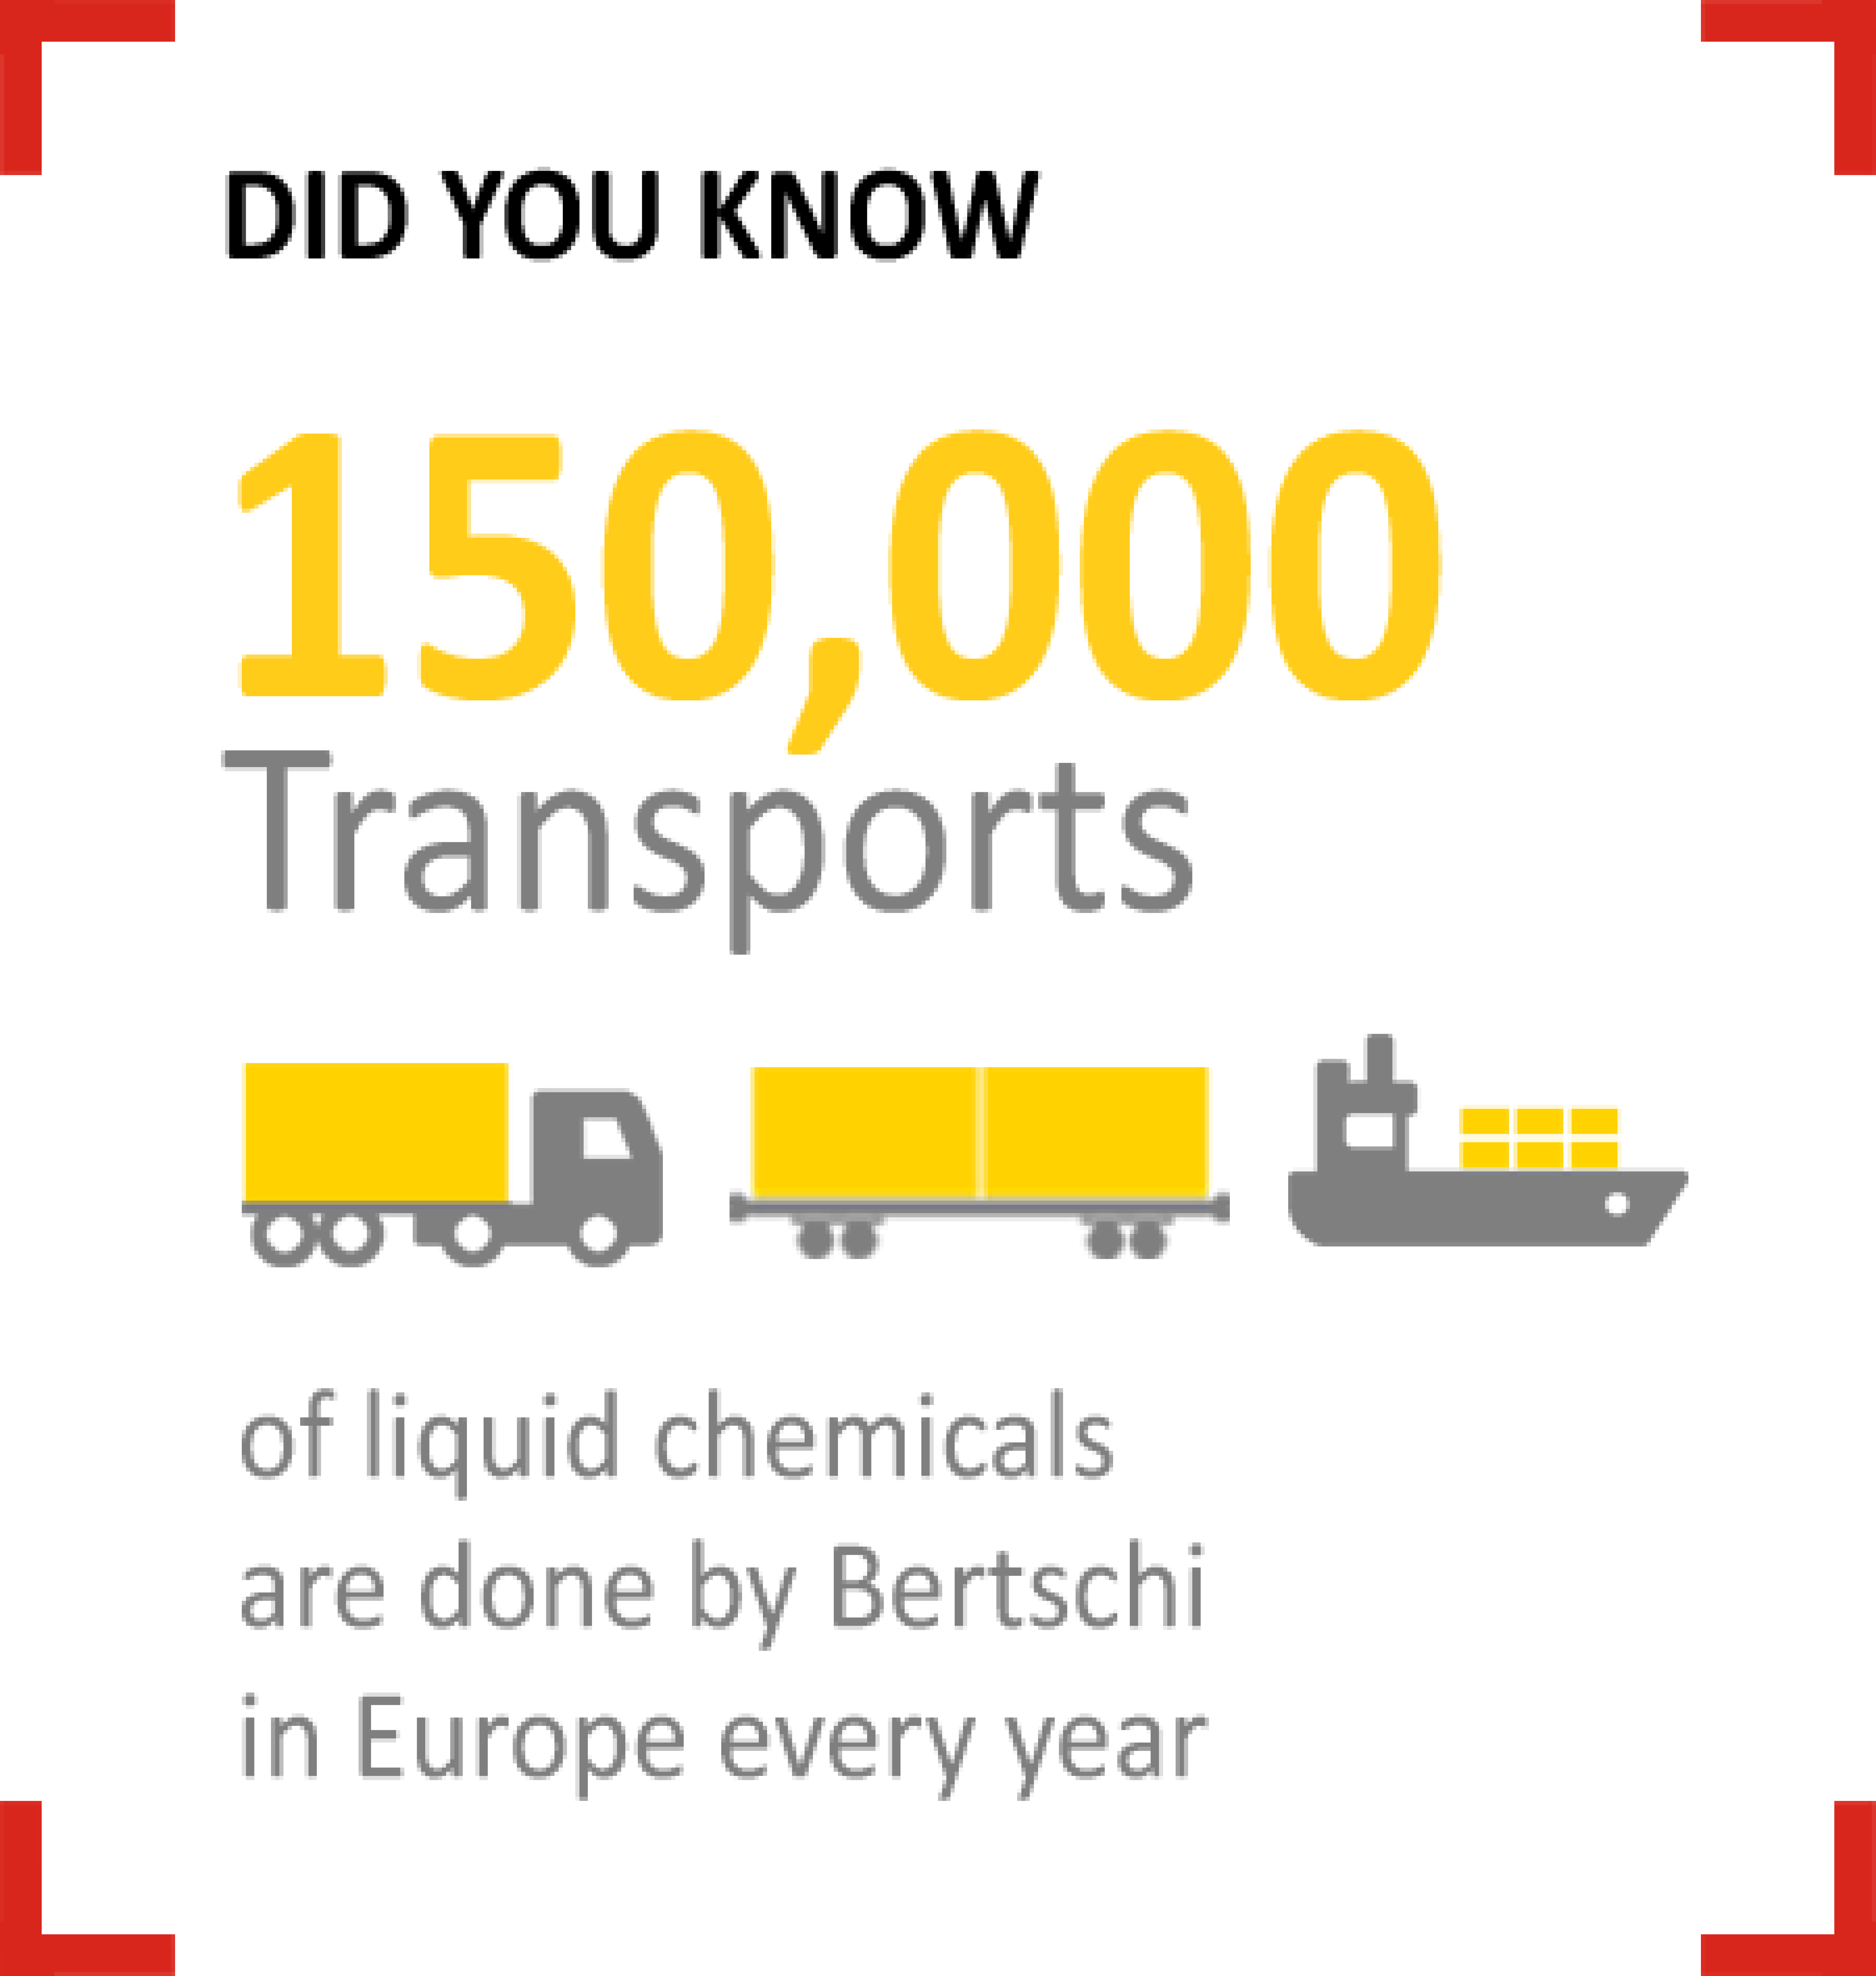 A figure of the 150'000 transports of liquid chemicals that Bertschi carries out every year.